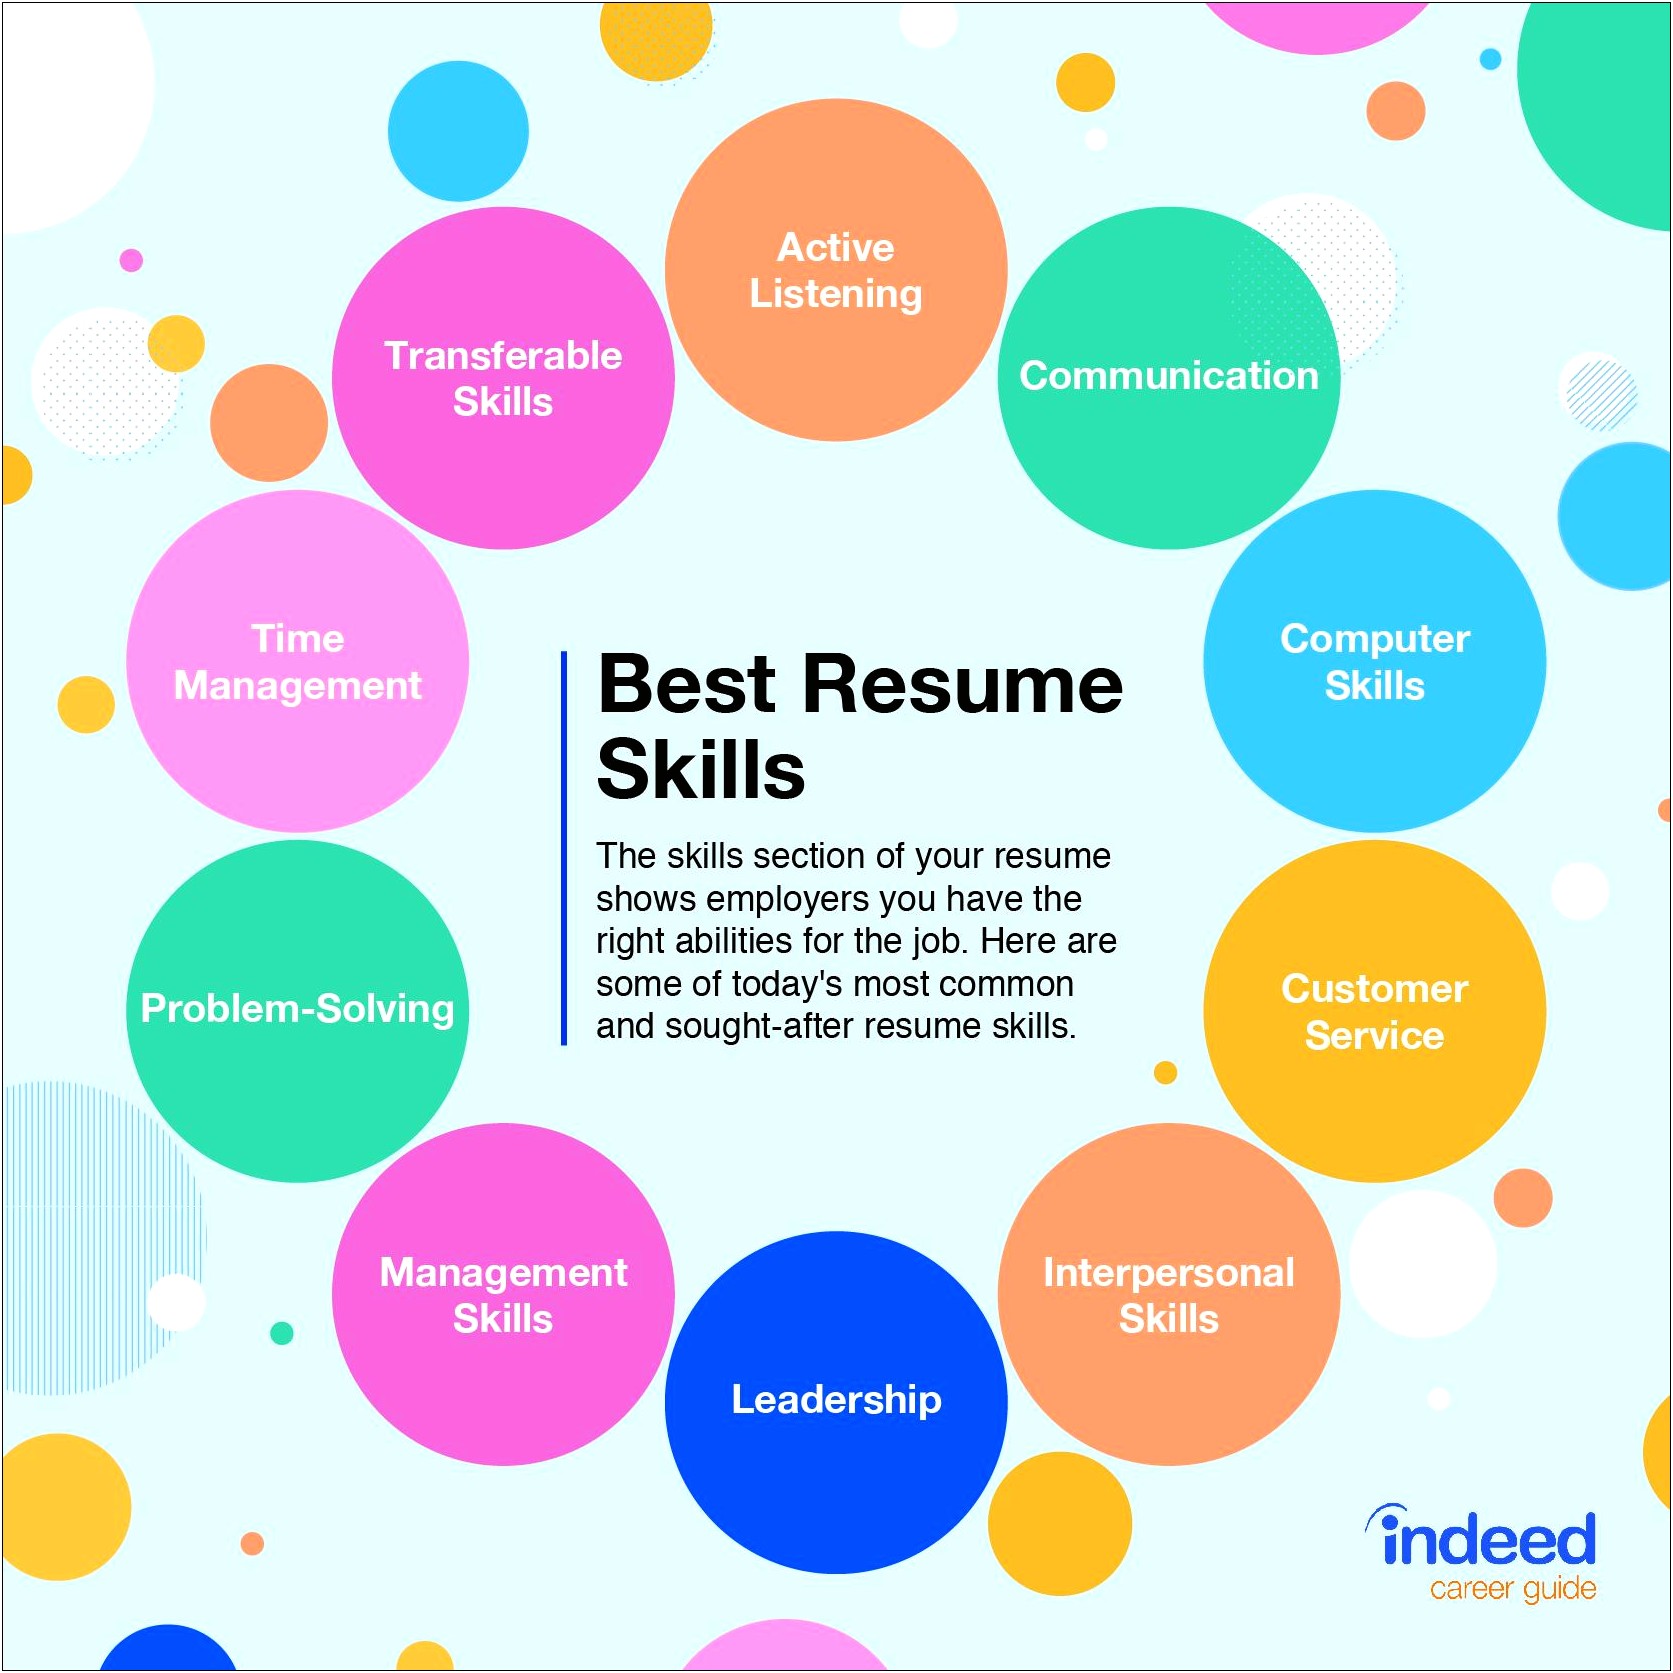 Key Skills That Stand Out On A Resume